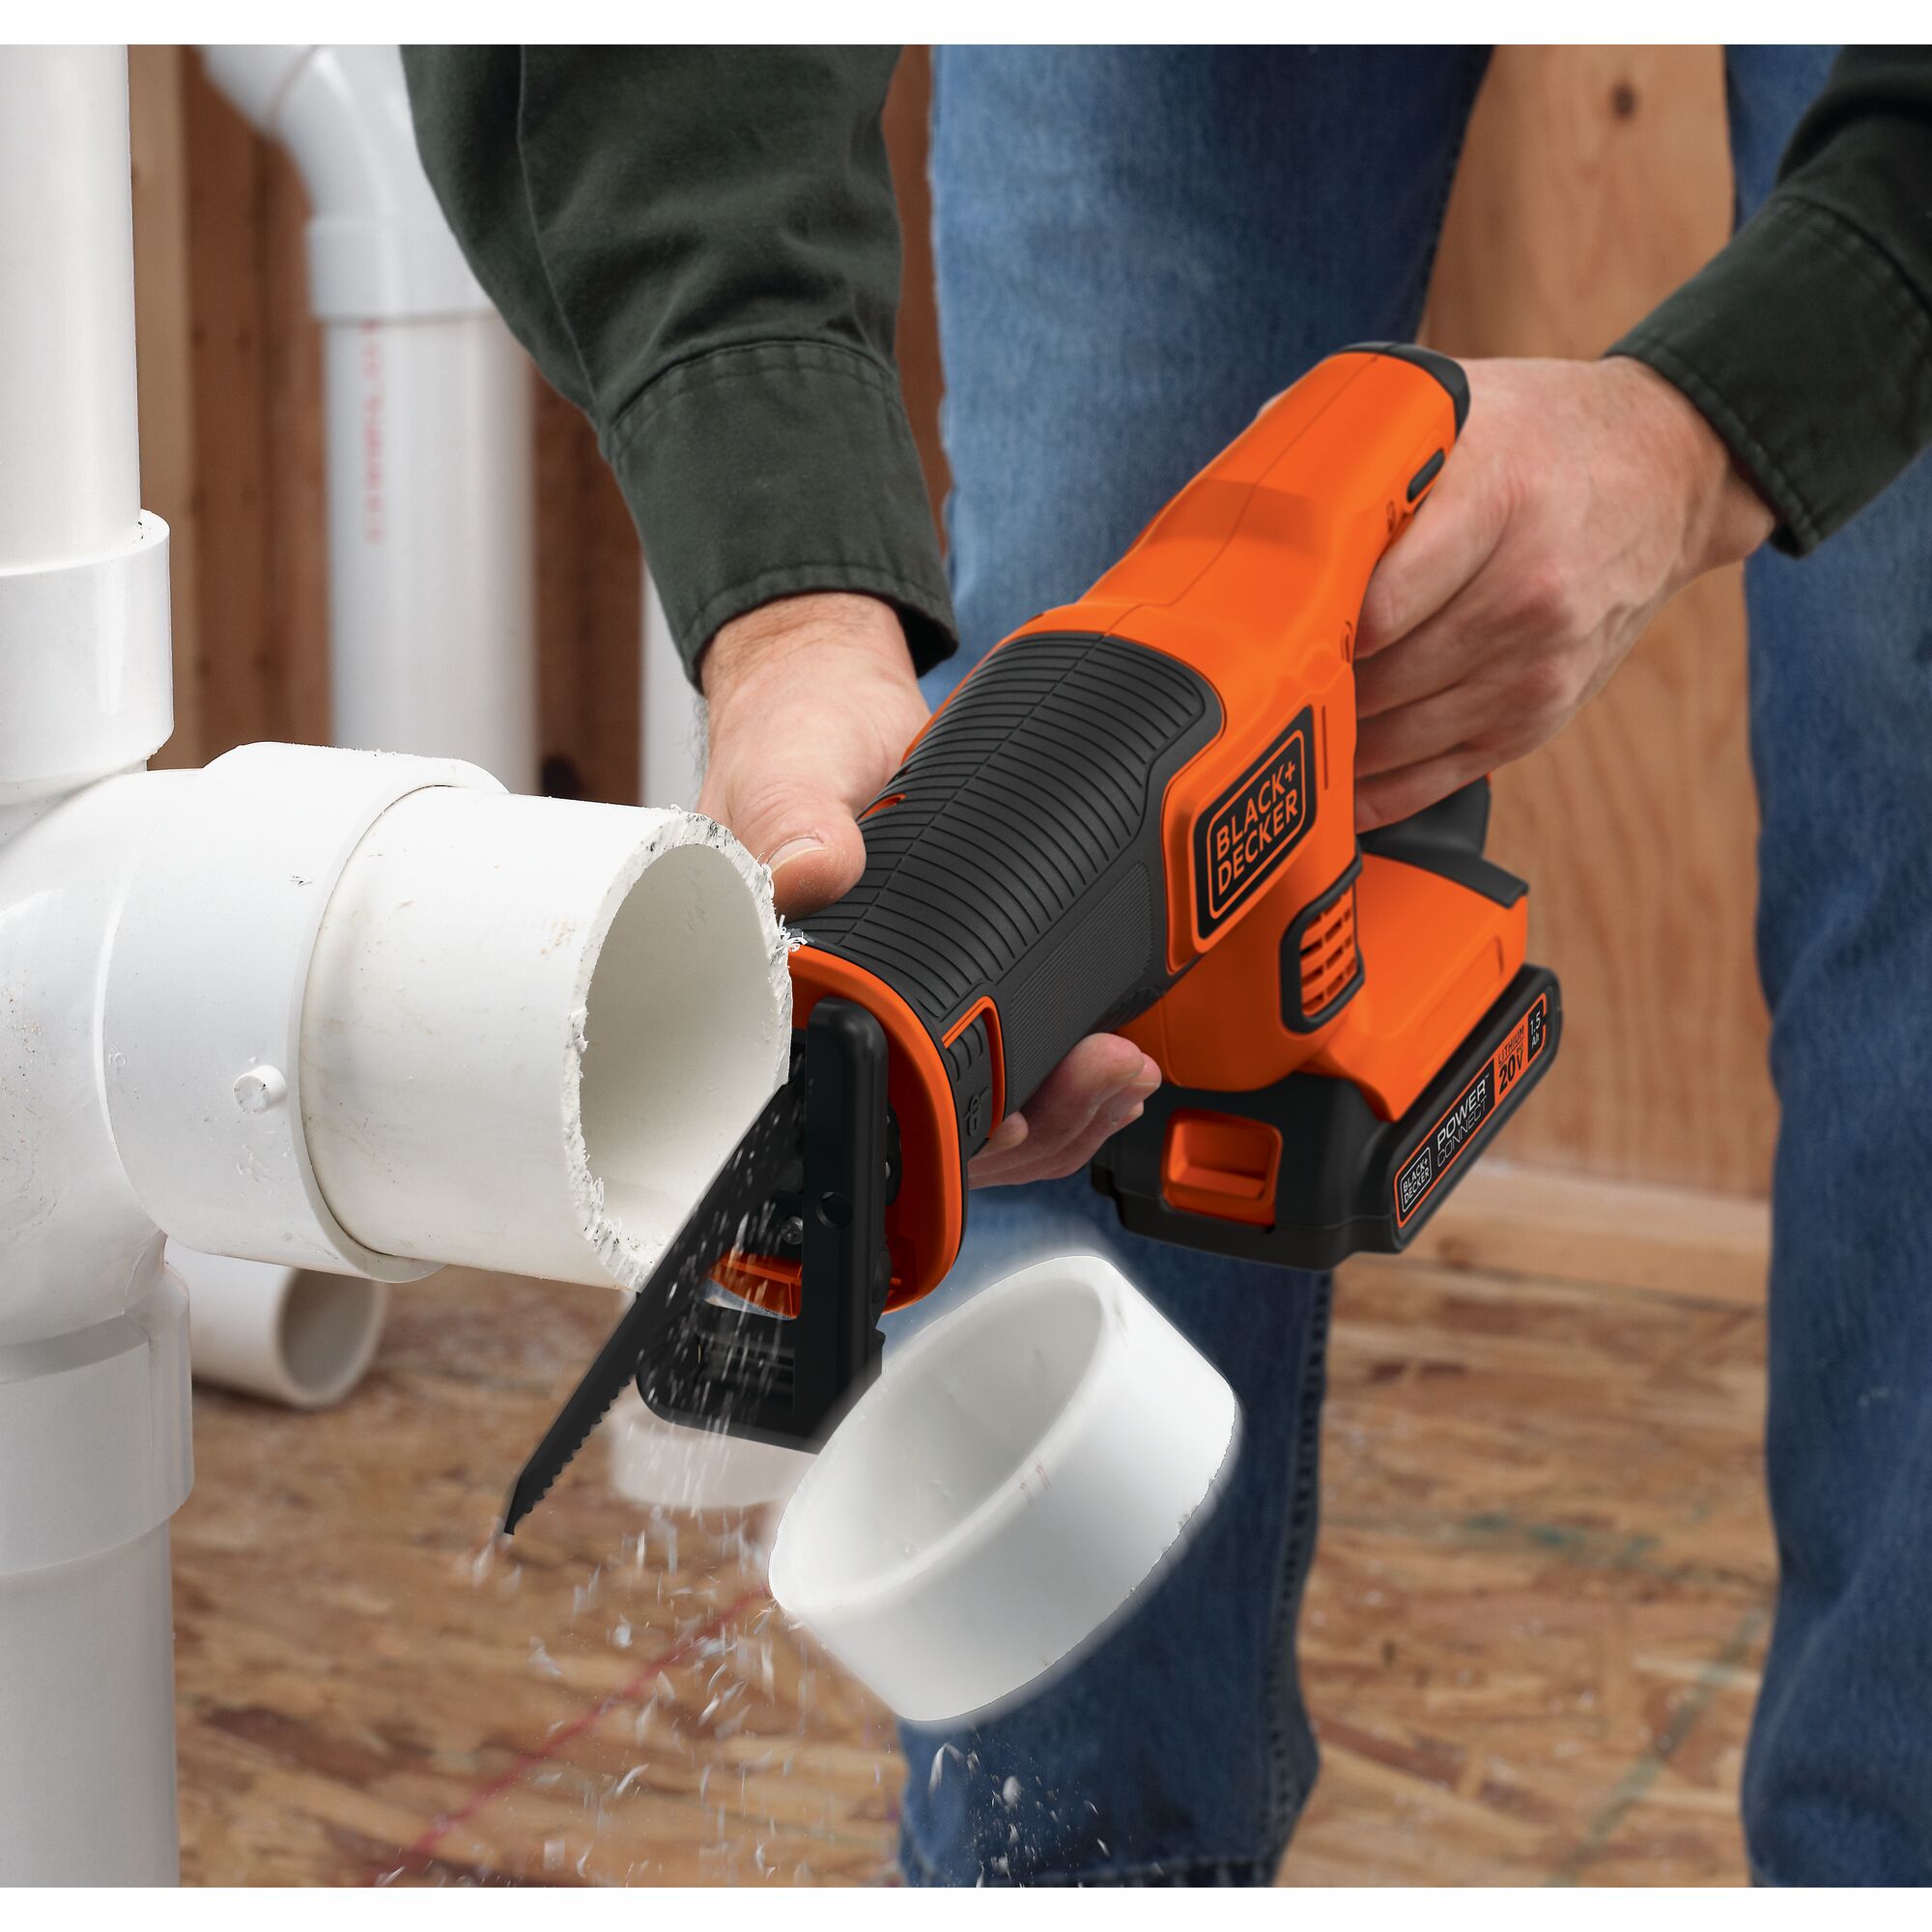 Black and decker 20 volt max lithium ion reciprocating saw being used to cut PVC